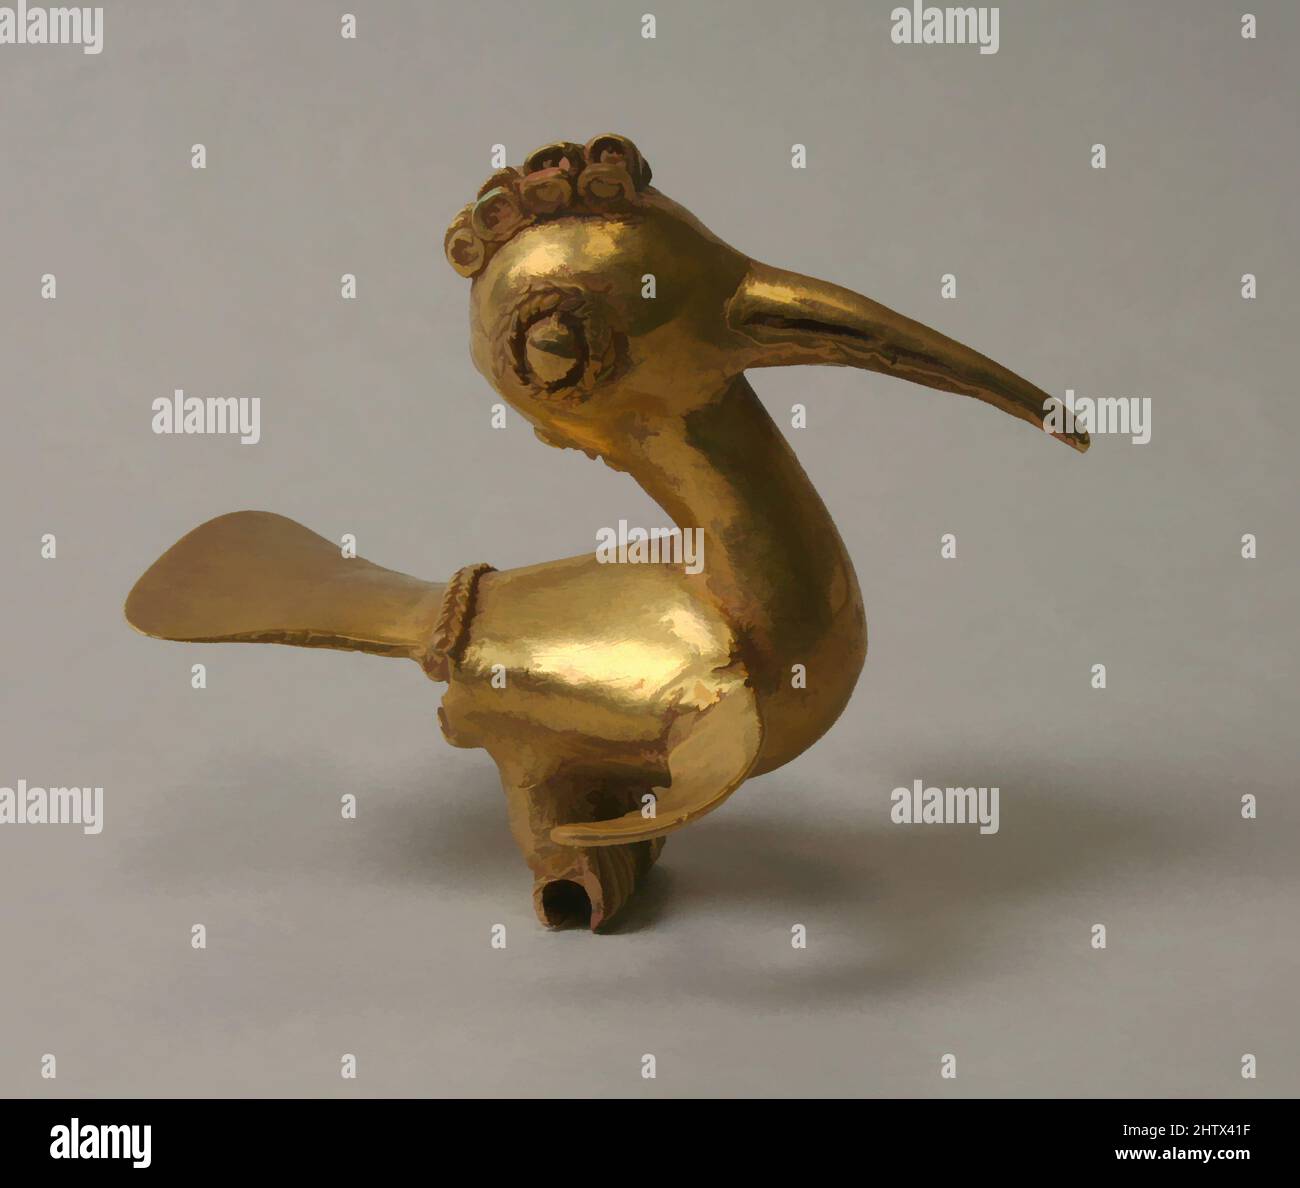 Art inspired by Bird Finial, 5th–10th century, Colombia, Zenu or Sinu, Gold, Height 2-1/8 in., Metal-Ornaments, Classic works modernized by Artotop with a splash of modernity. Shapes, color and value, eye-catching visual impact on art. Emotions through freedom of artworks in a contemporary way. A timeless message pursuing a wildly creative new direction. Artists turning to the digital medium and creating the Artotop NFT Stock Photo